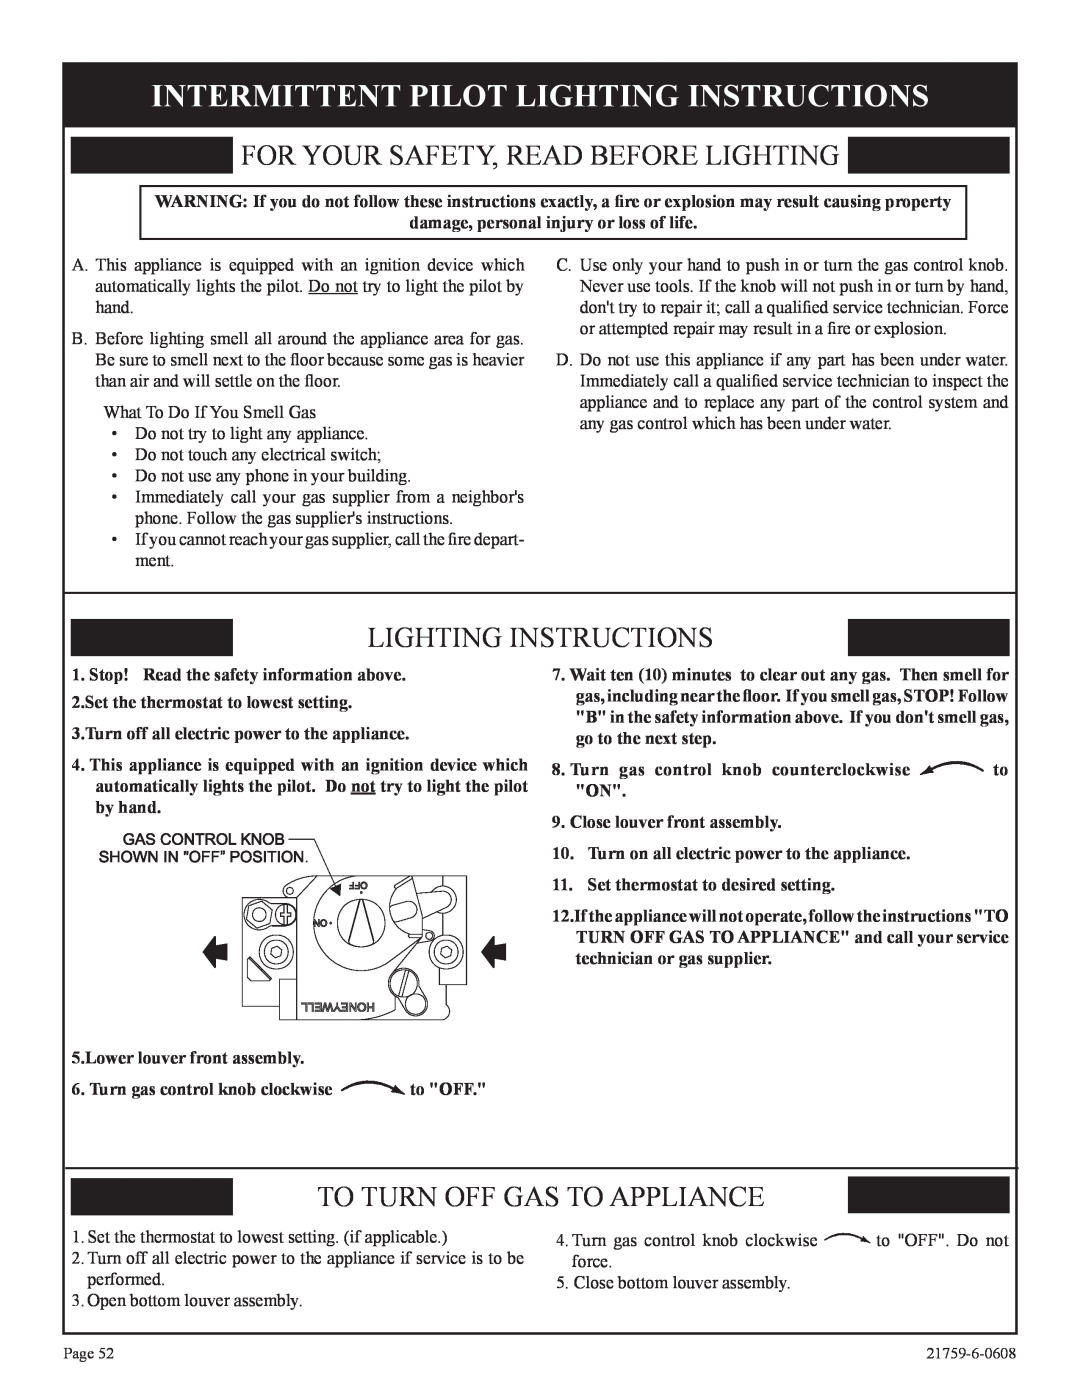 Empire Comfort Systems P)-2, DVP42FP Intermittent Pilot Lighting Instructions, To Turn Off Gas To Appliance 